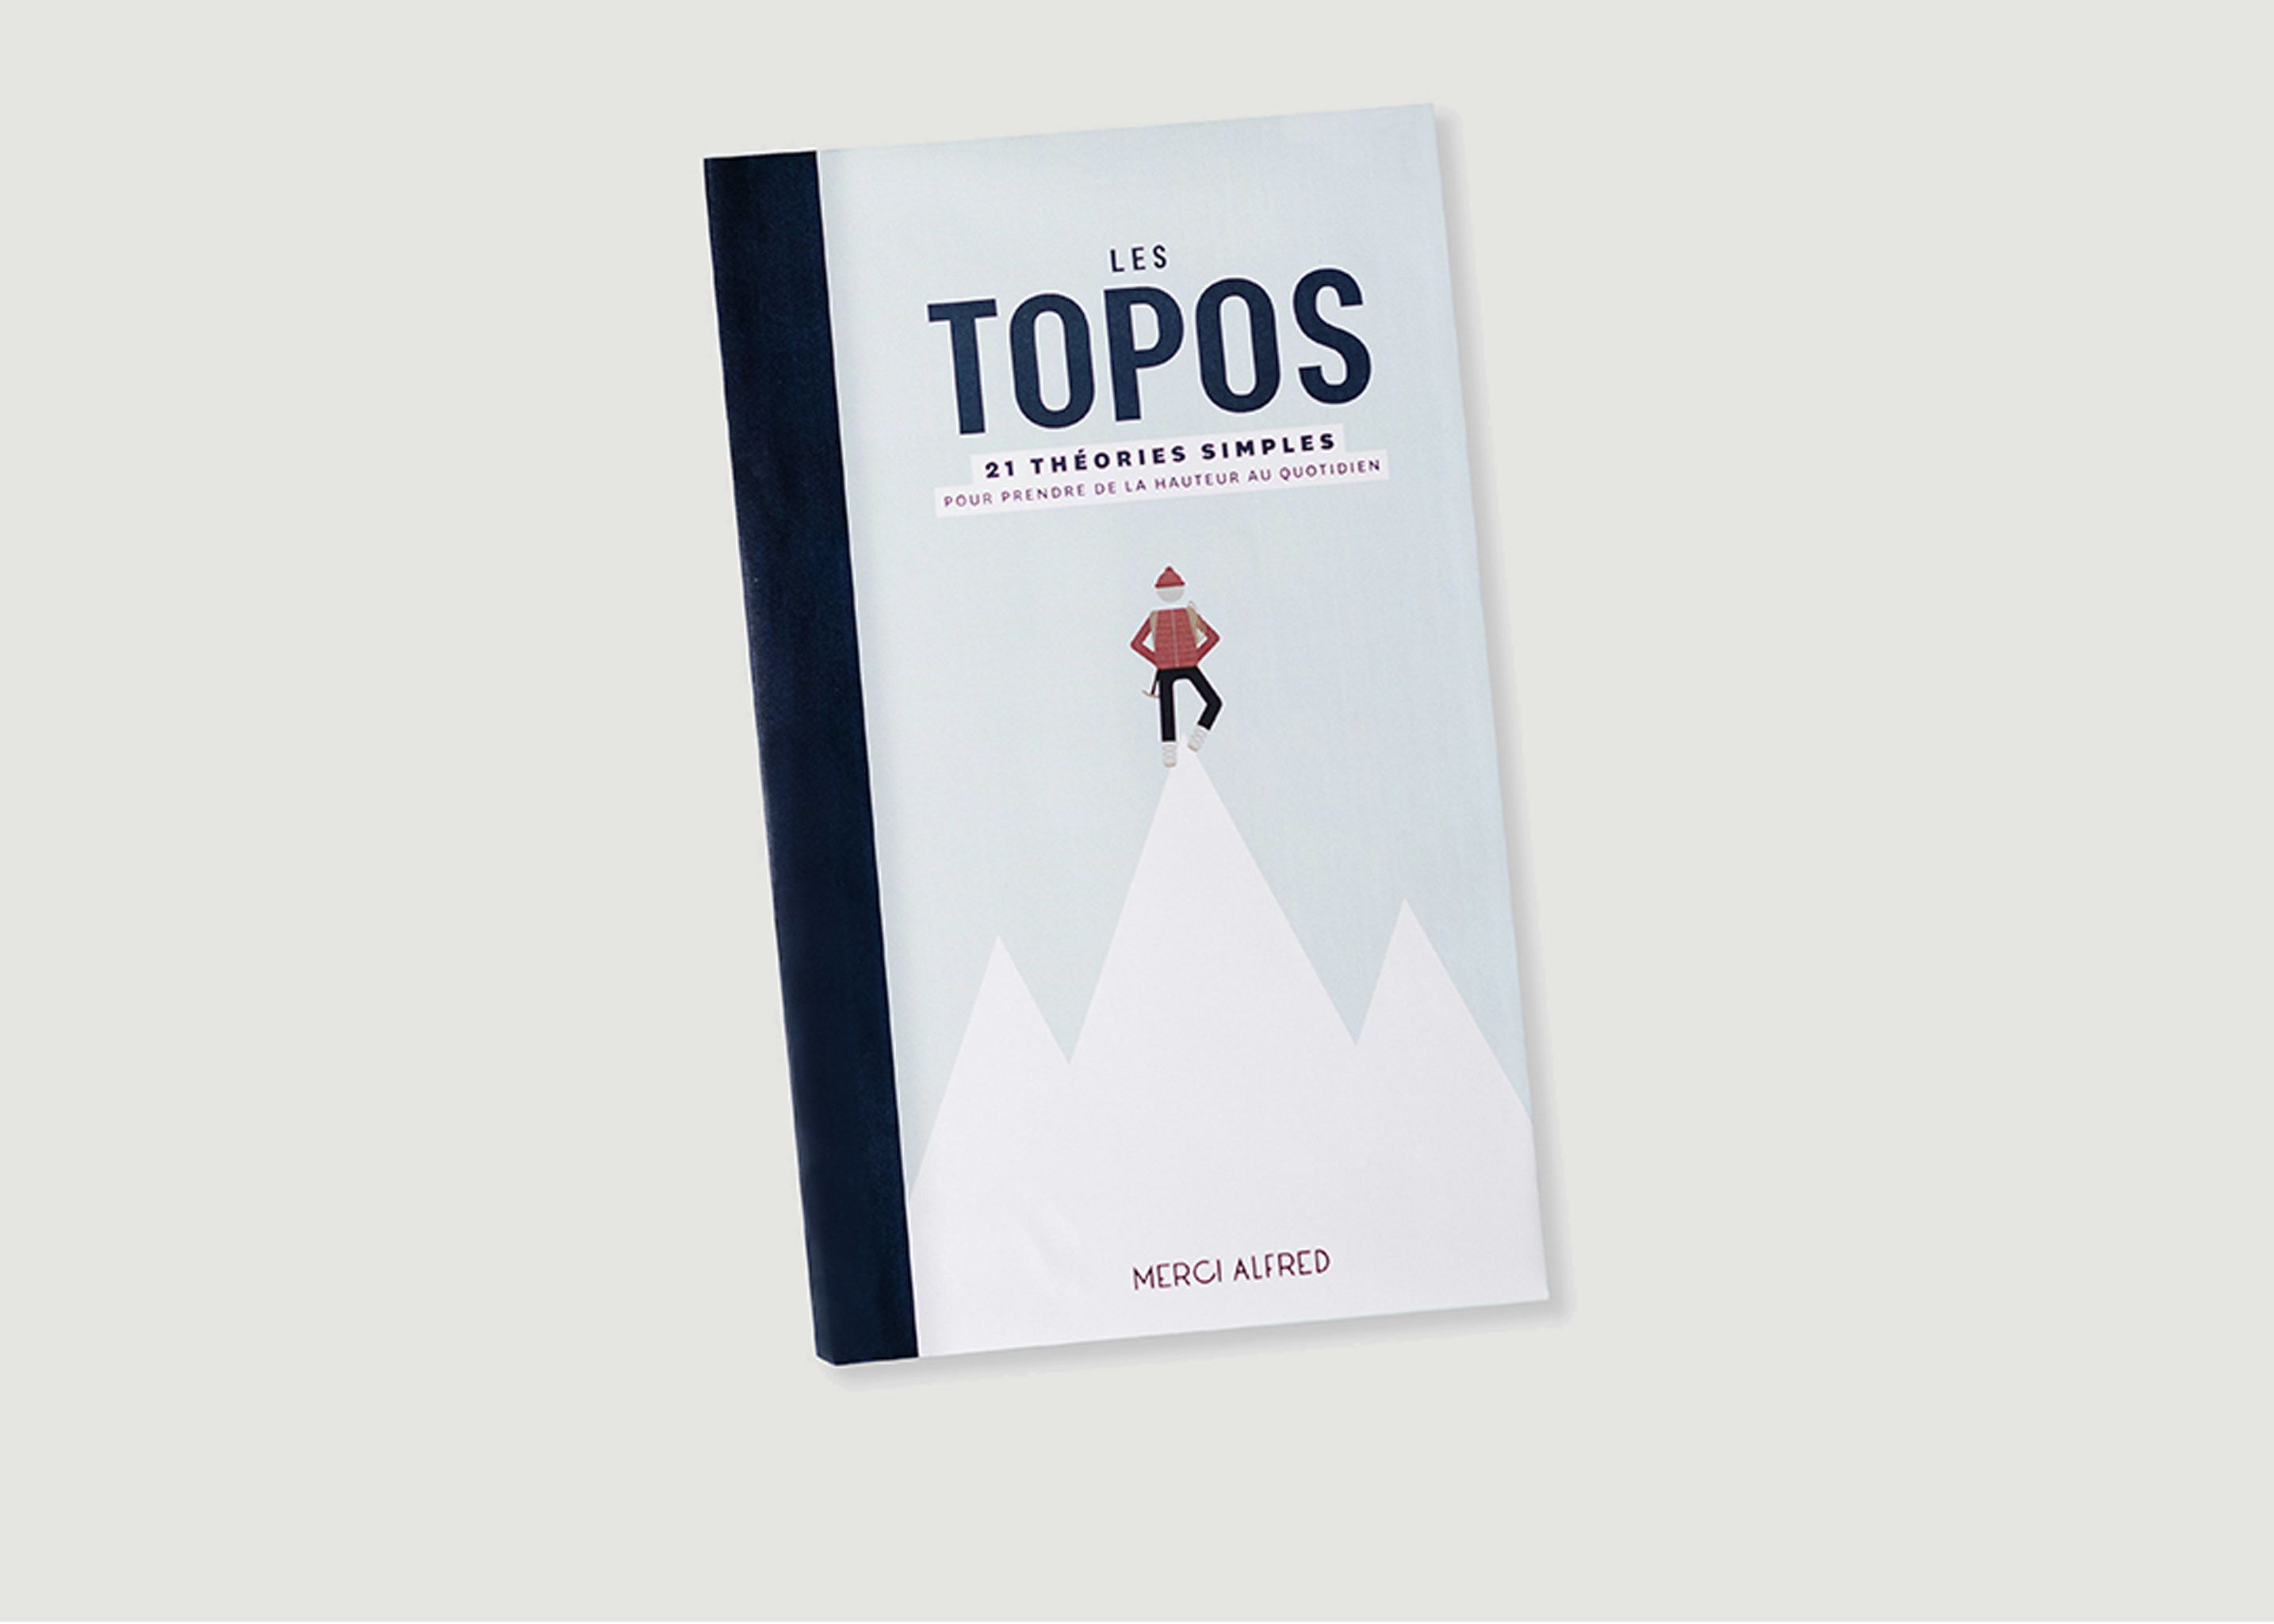 Les Topos : The Book - Merci Alfred